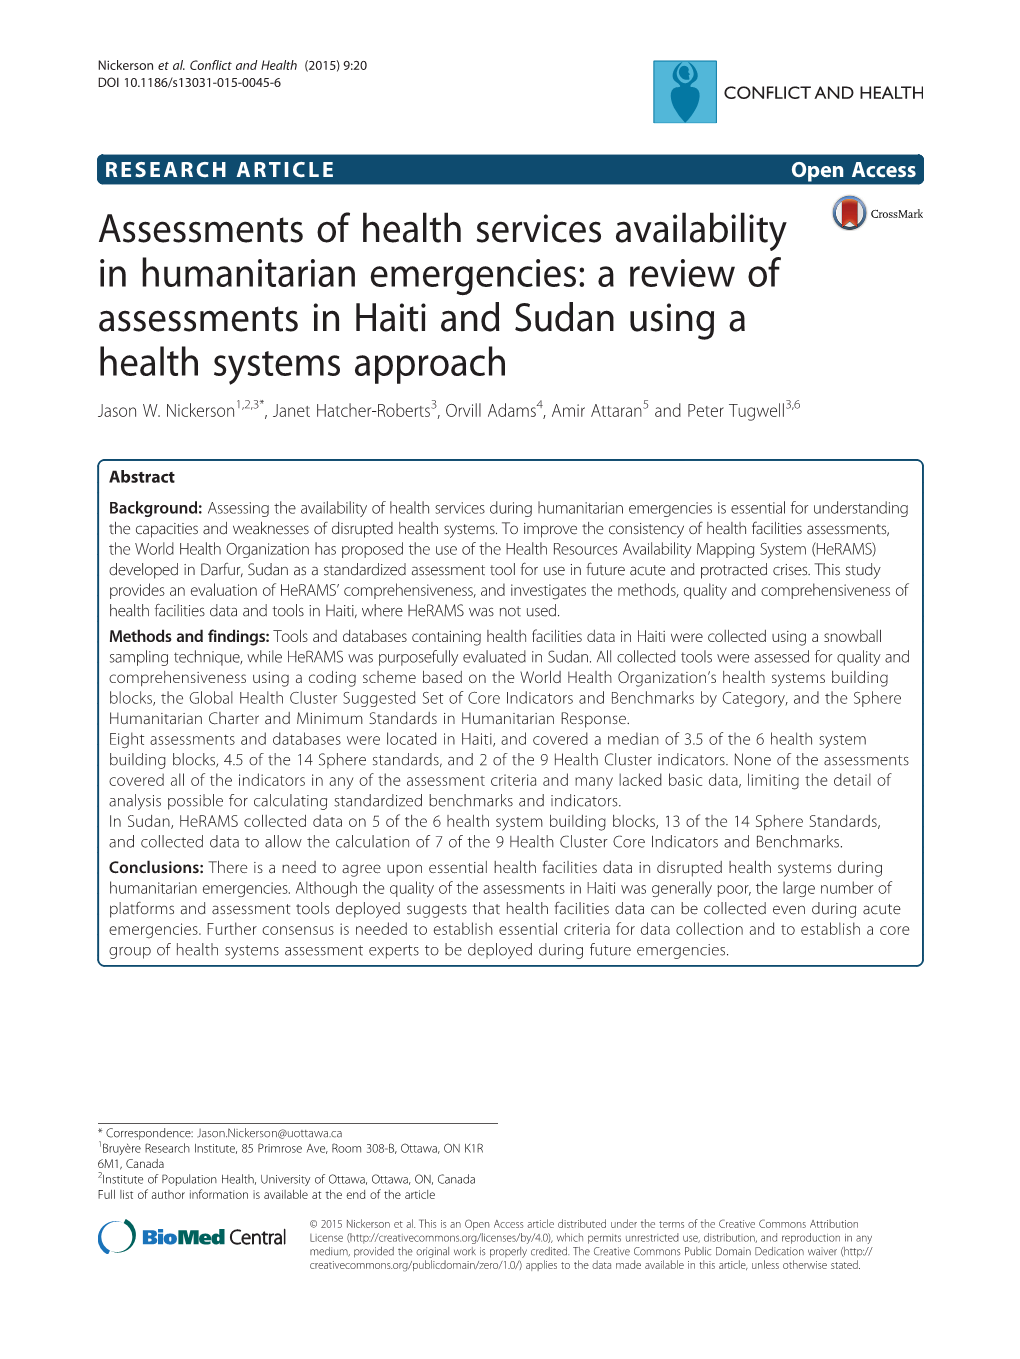 Assessments of Health Services Availability in Humanitarian Emergencies: a Review of Assessments in Haiti and Sudan Using a Health Systems Approach Jason W